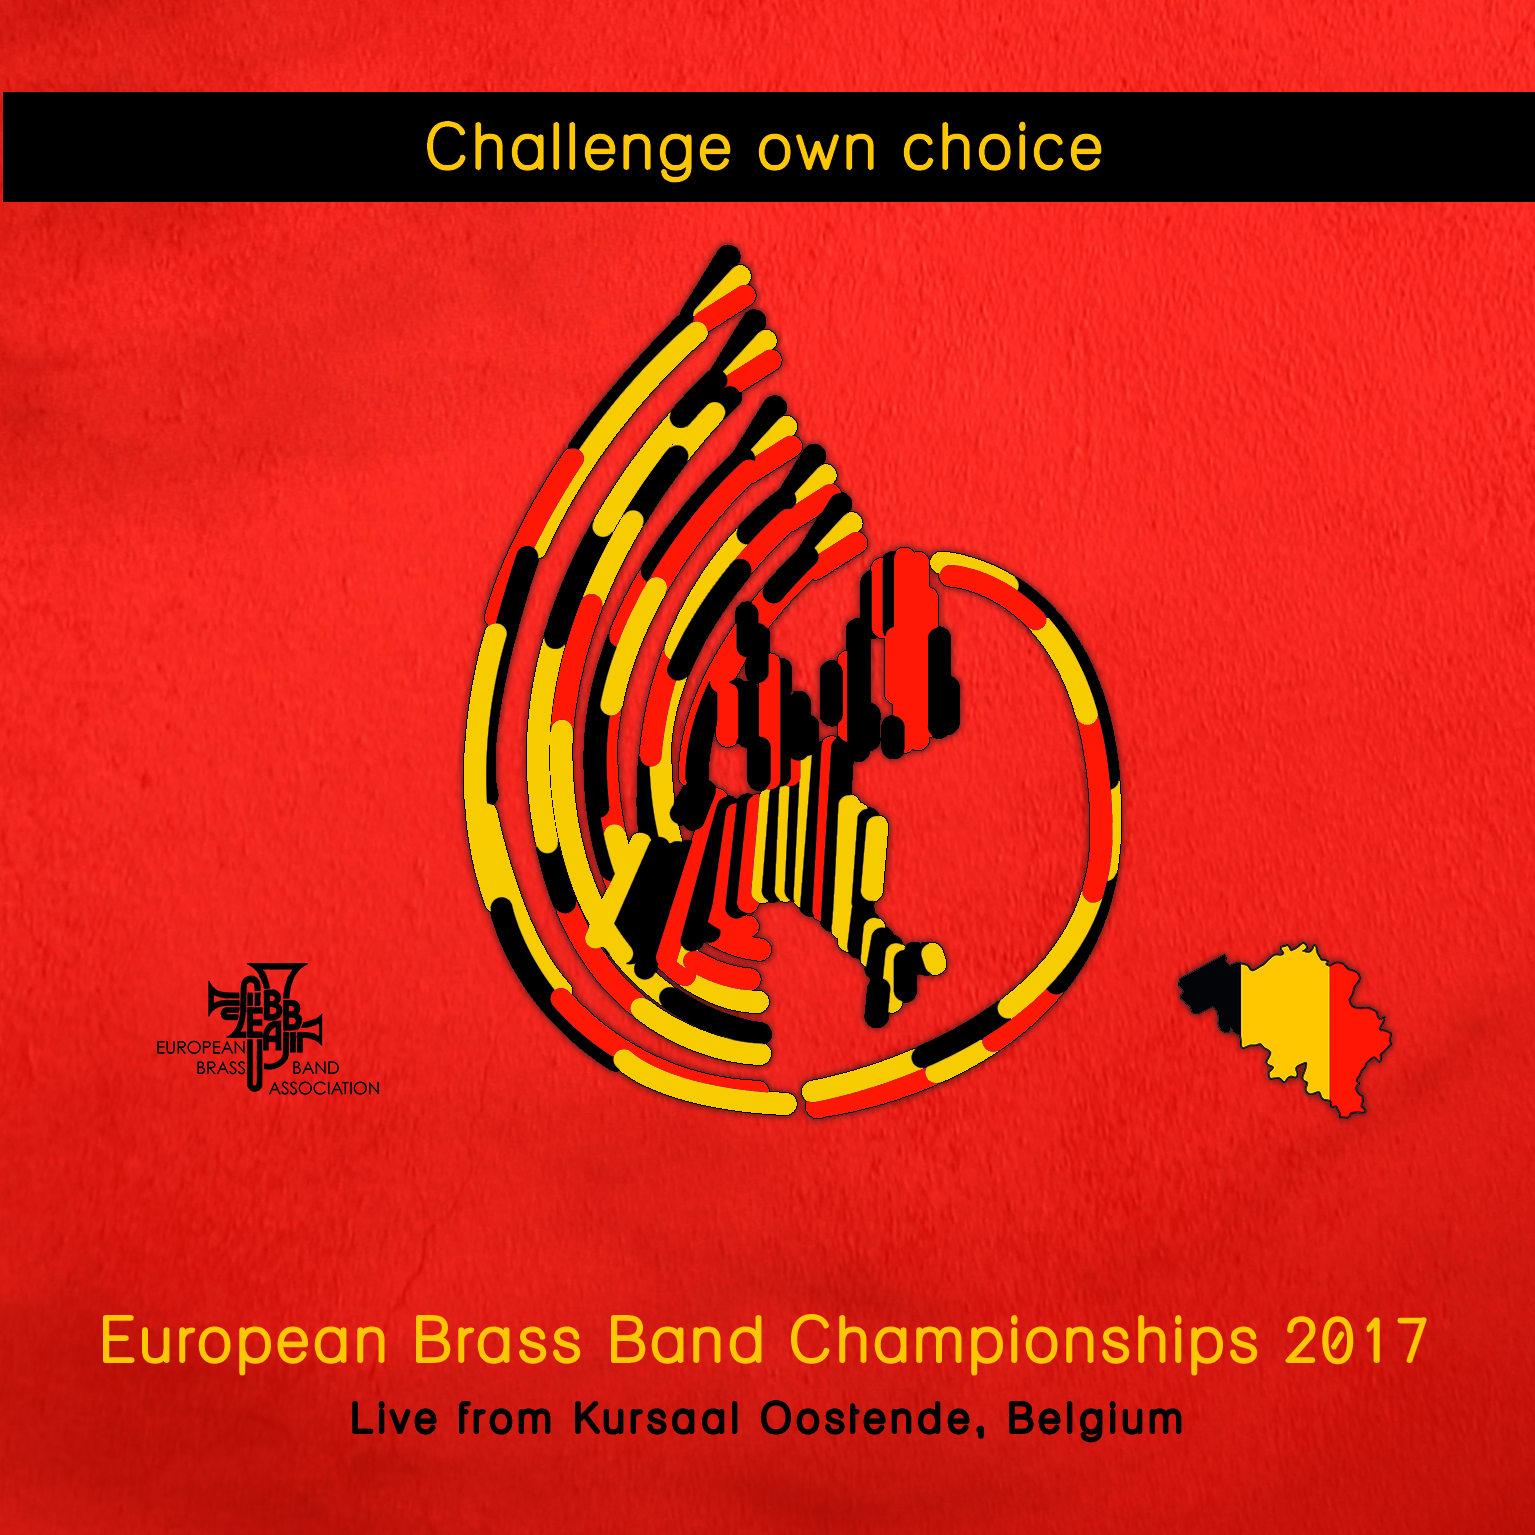 European Brass Band Championships 2017 - Challenge Section Own Choice - Download